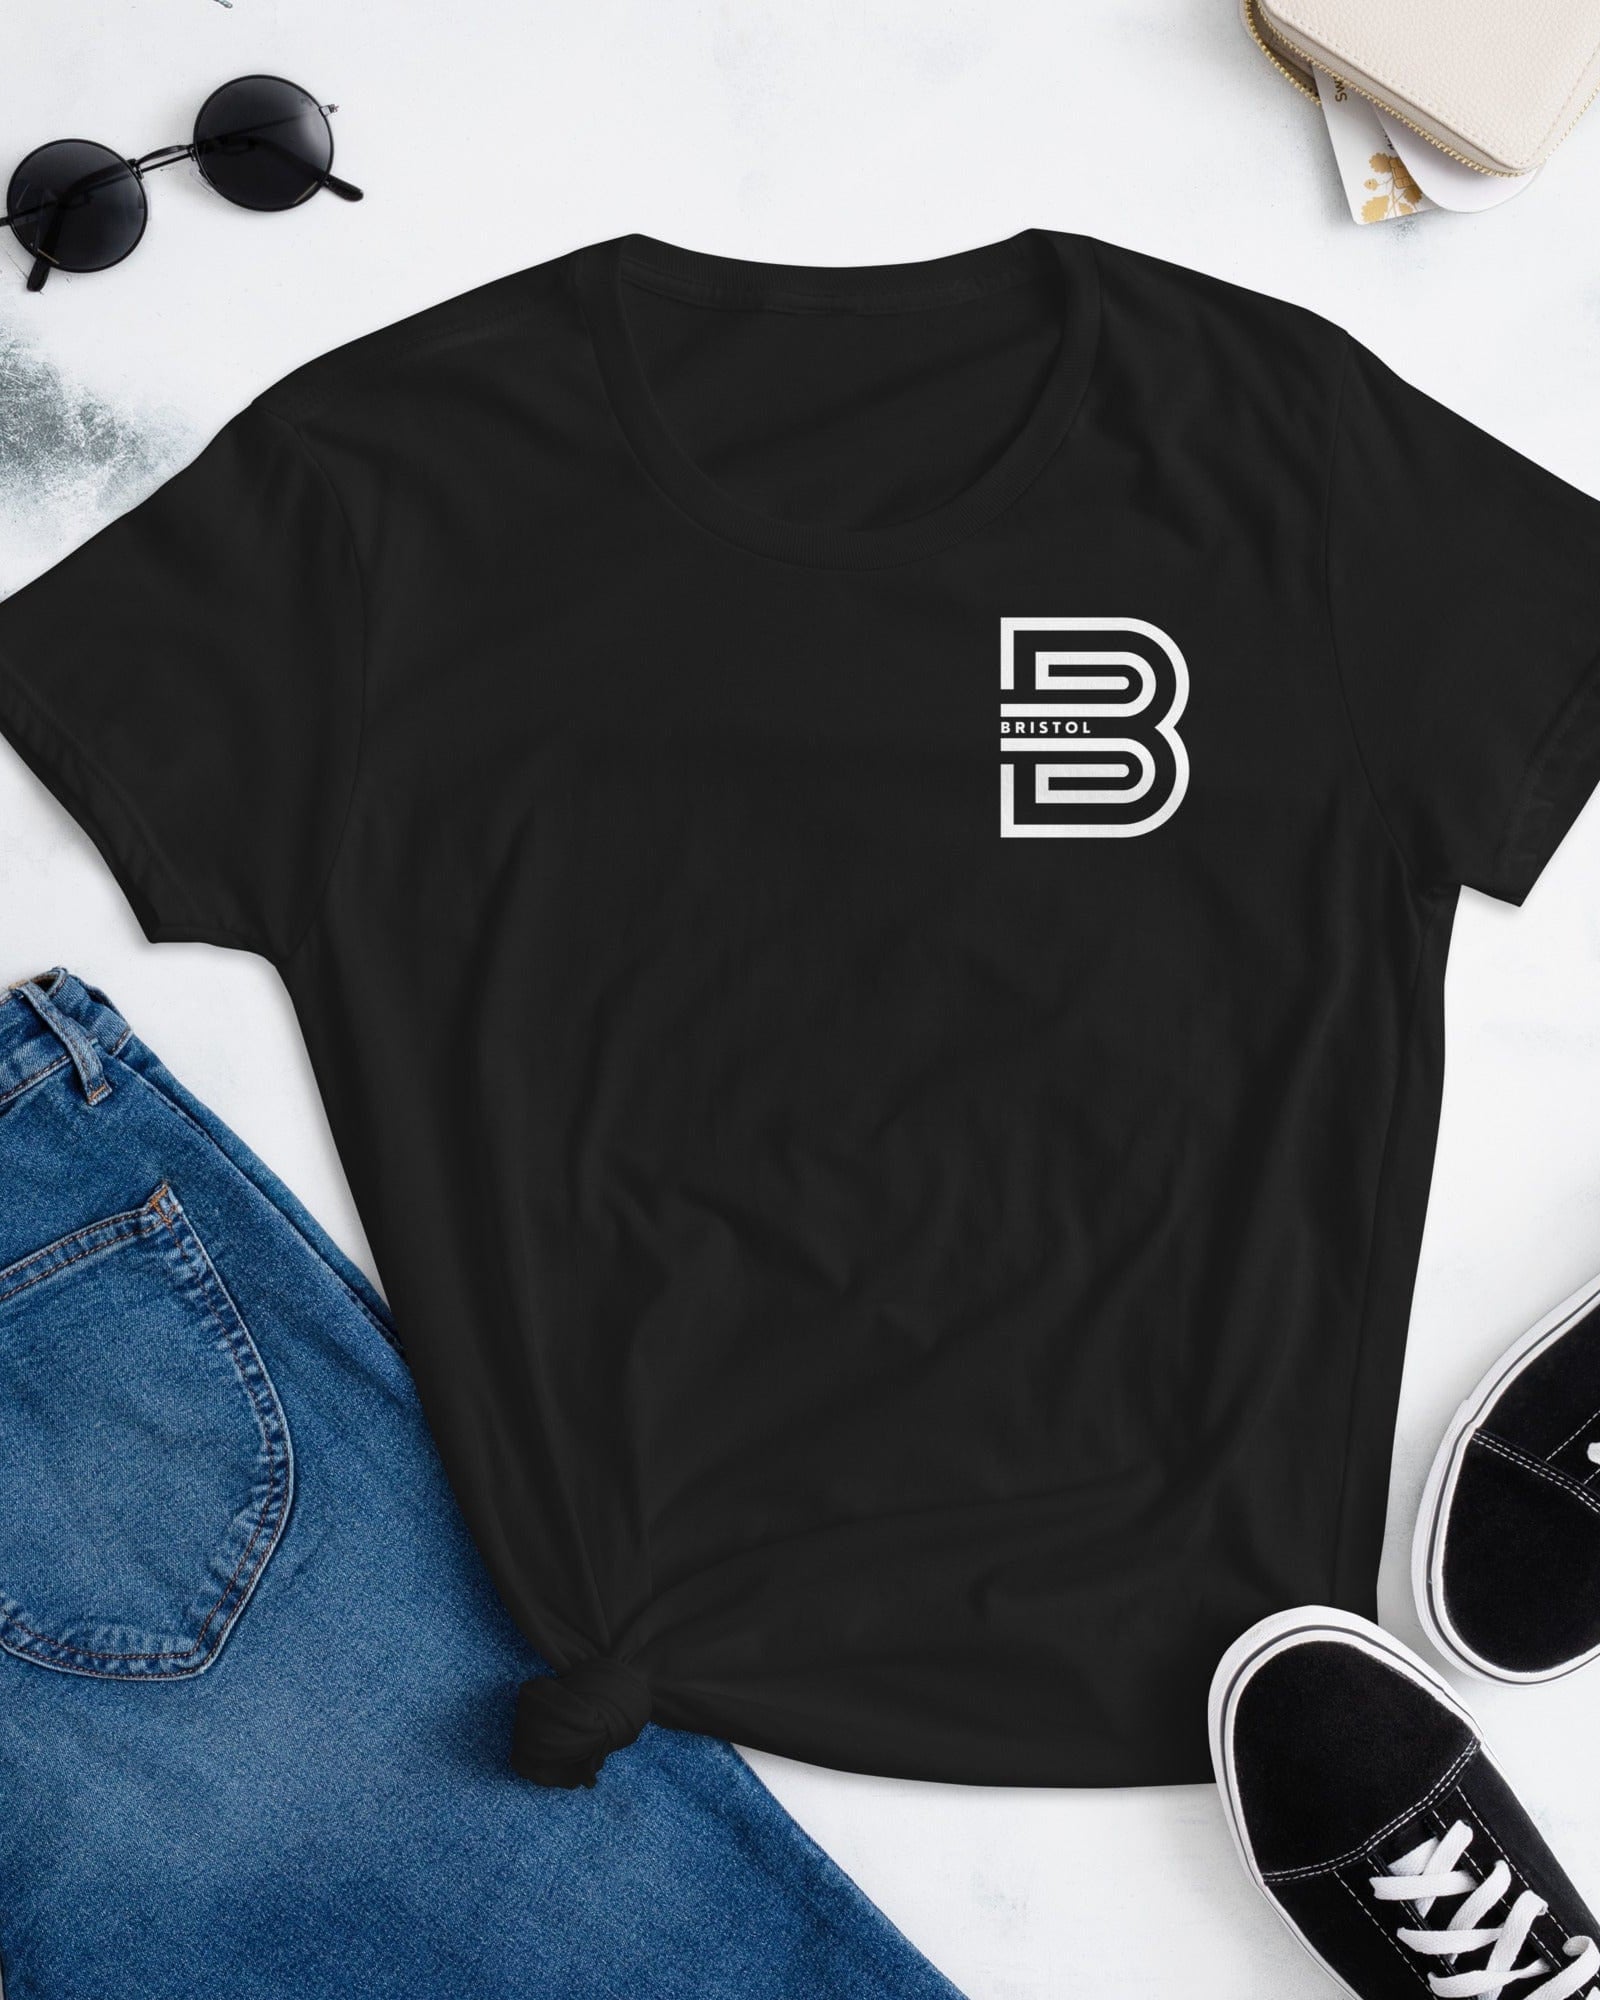 Our Bristol Shop is a collection of apparel and gifts celebrating Bristol, England. It includes our popular Bristol B tshirts, sweatshirts, hoodies, and long-sleeve shirts, as well as Bristol Ancient Modern Love items. Represent Bristol in style.